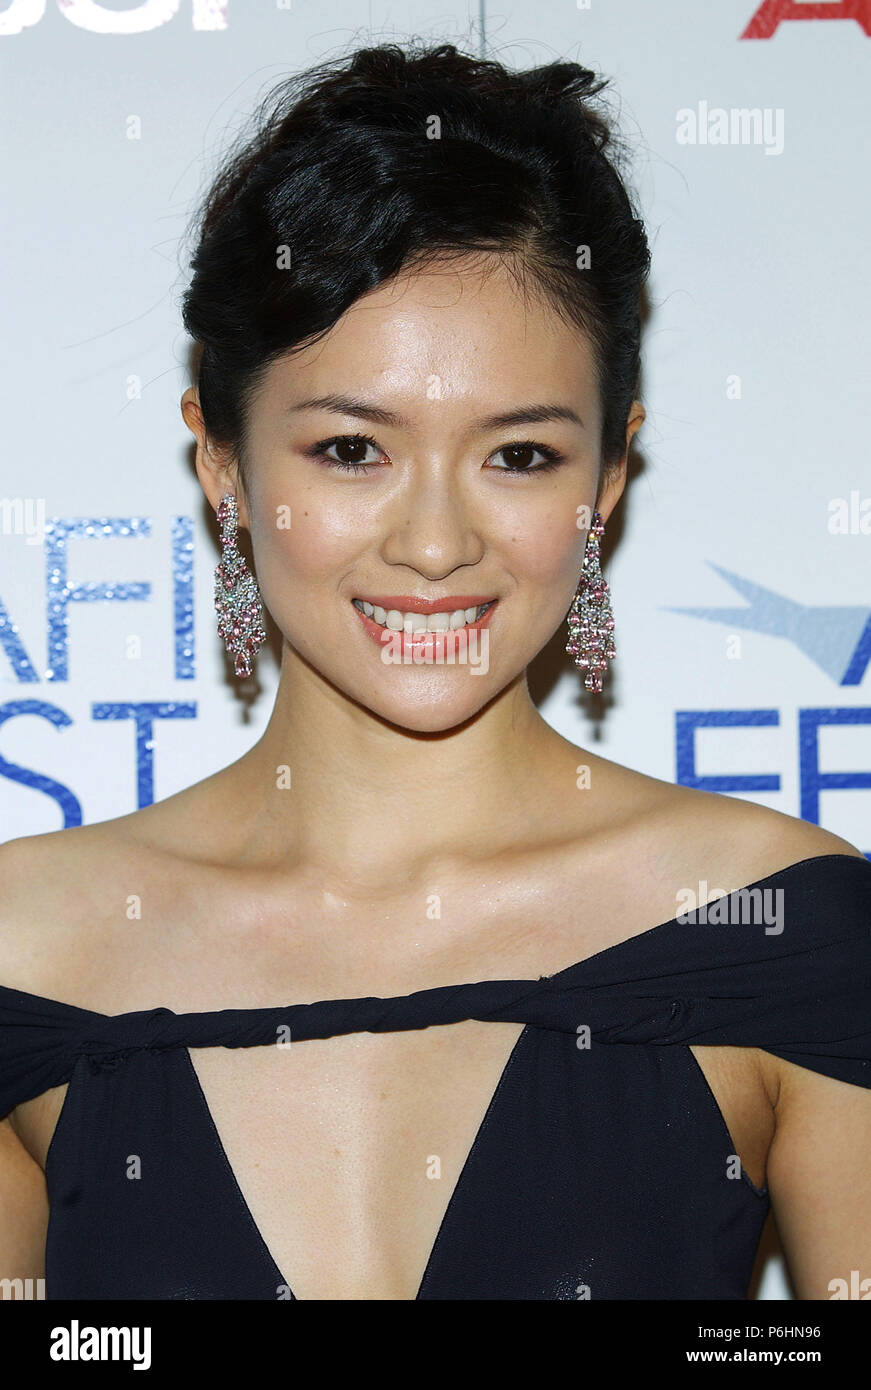 Ziyi Zhang arriving at the screening for The House Of The Flying Daggers at the AFI Fest at the Arclight Theatre in Los Angeles. November 6, 2004.10-ZiyiZhang Red Carpet Event, Vertical, USA, Film Industry, Celebrities,  Photography, Bestof, Arts Culture and Entertainment, Topix Celebrities fashion /  Vertical, Best of, Event in Hollywood Life - California,  Red Carpet and backstage, USA, Film Industry, Celebrities,  movie celebrities, TV celebrities, Music celebrities, Photography, Bestof, Arts Culture and Entertainment,  Topix, headshot, vertical, one person,, from the year , 2004, inquiry t Stock Photo